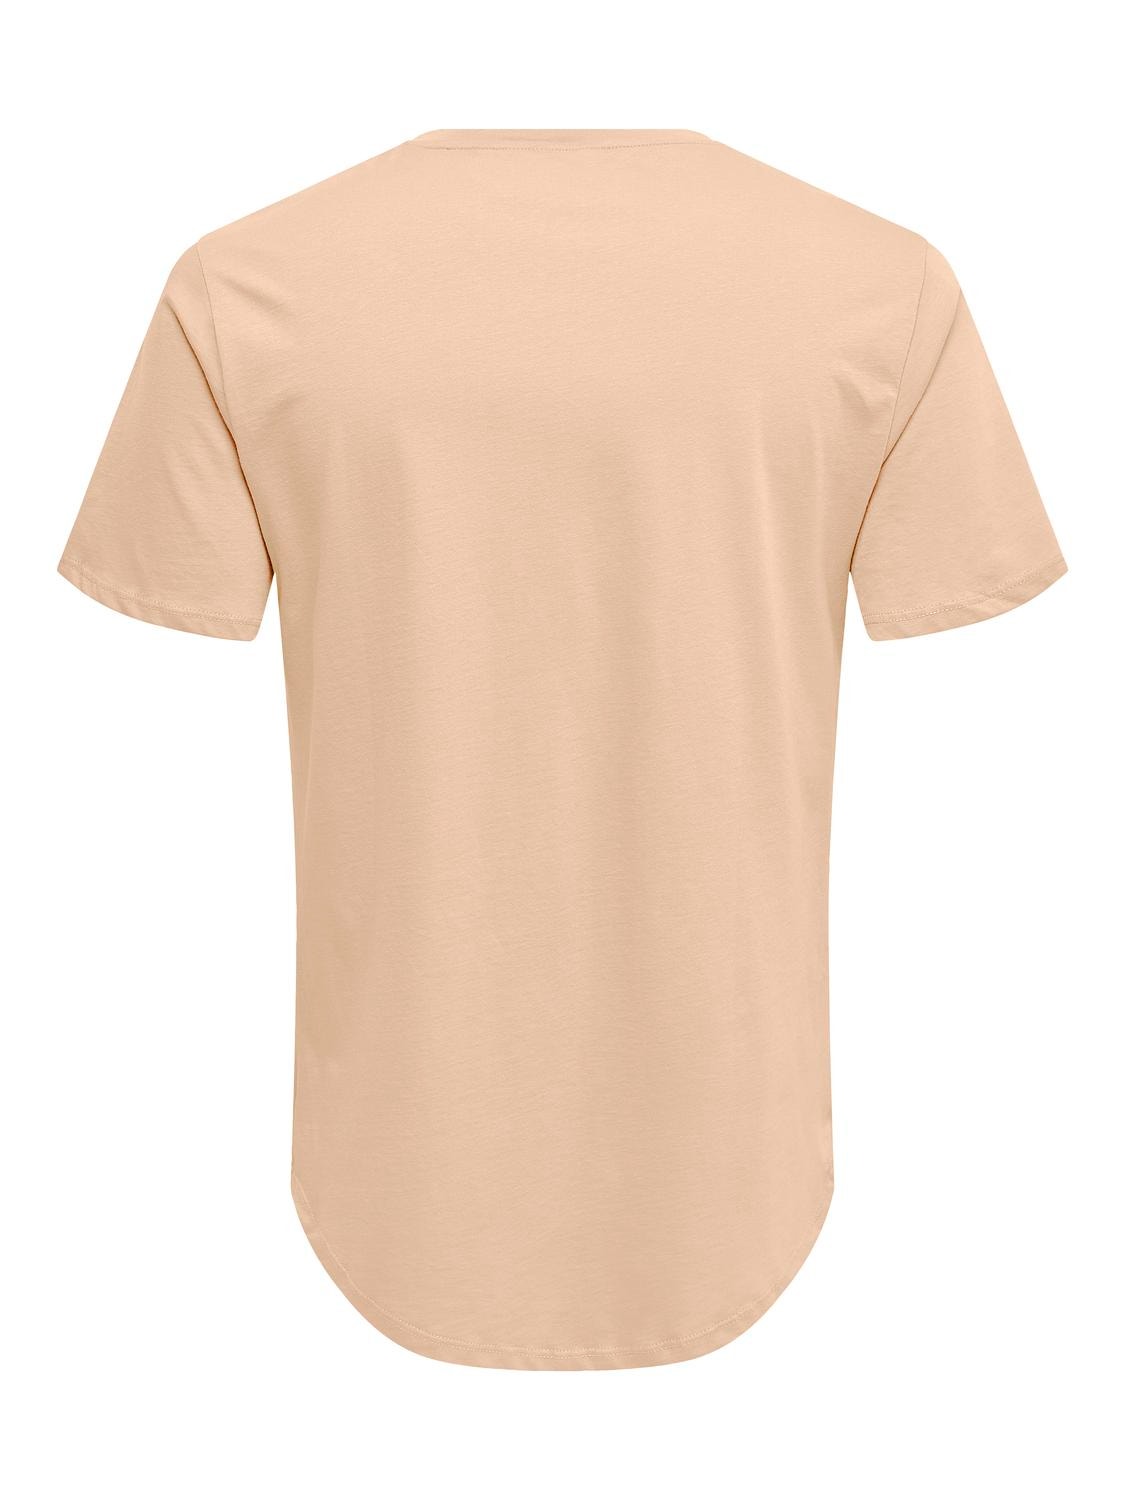 ONLY & SONS Long Line Fit Round Neck T-Shirt -Peach Nectar - 22002973